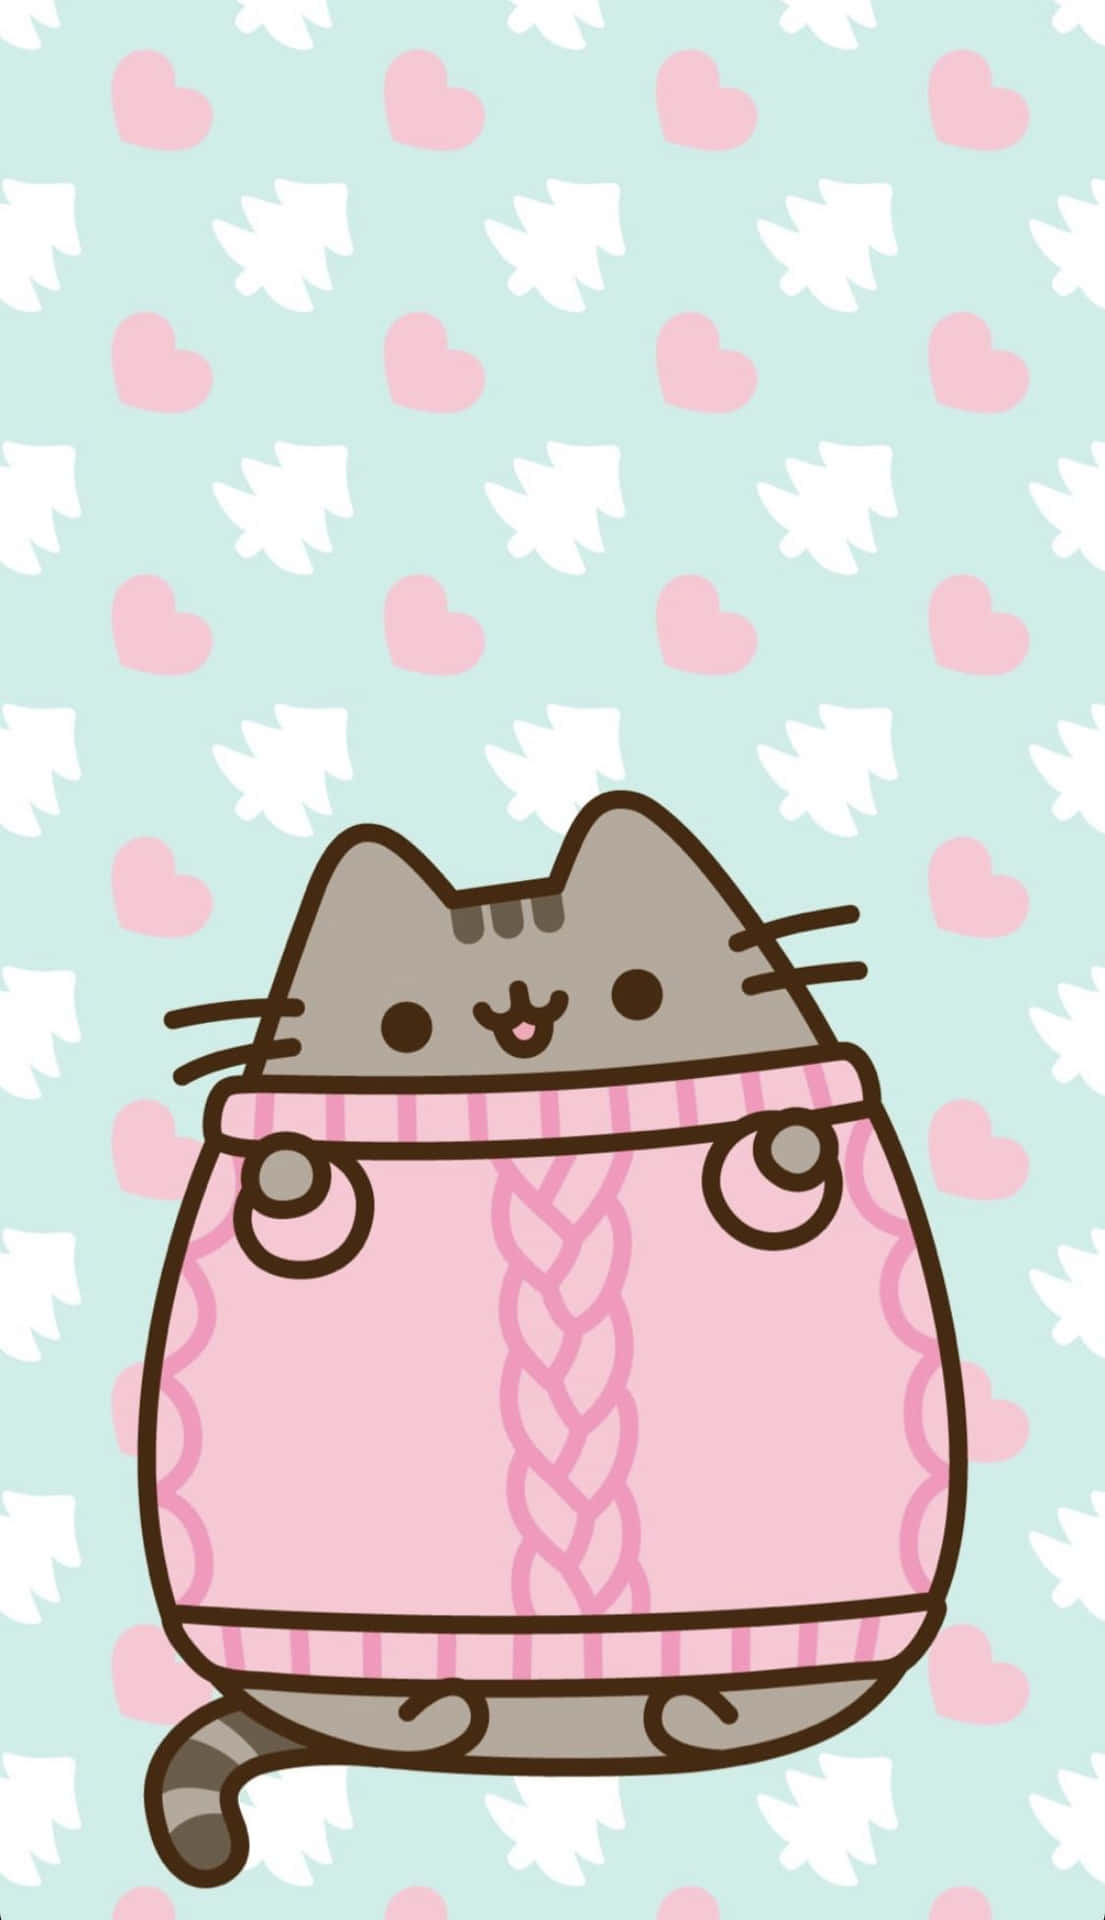 Celebrate Valentine's Day with a cute and kawaii Valentine design! Wallpaper